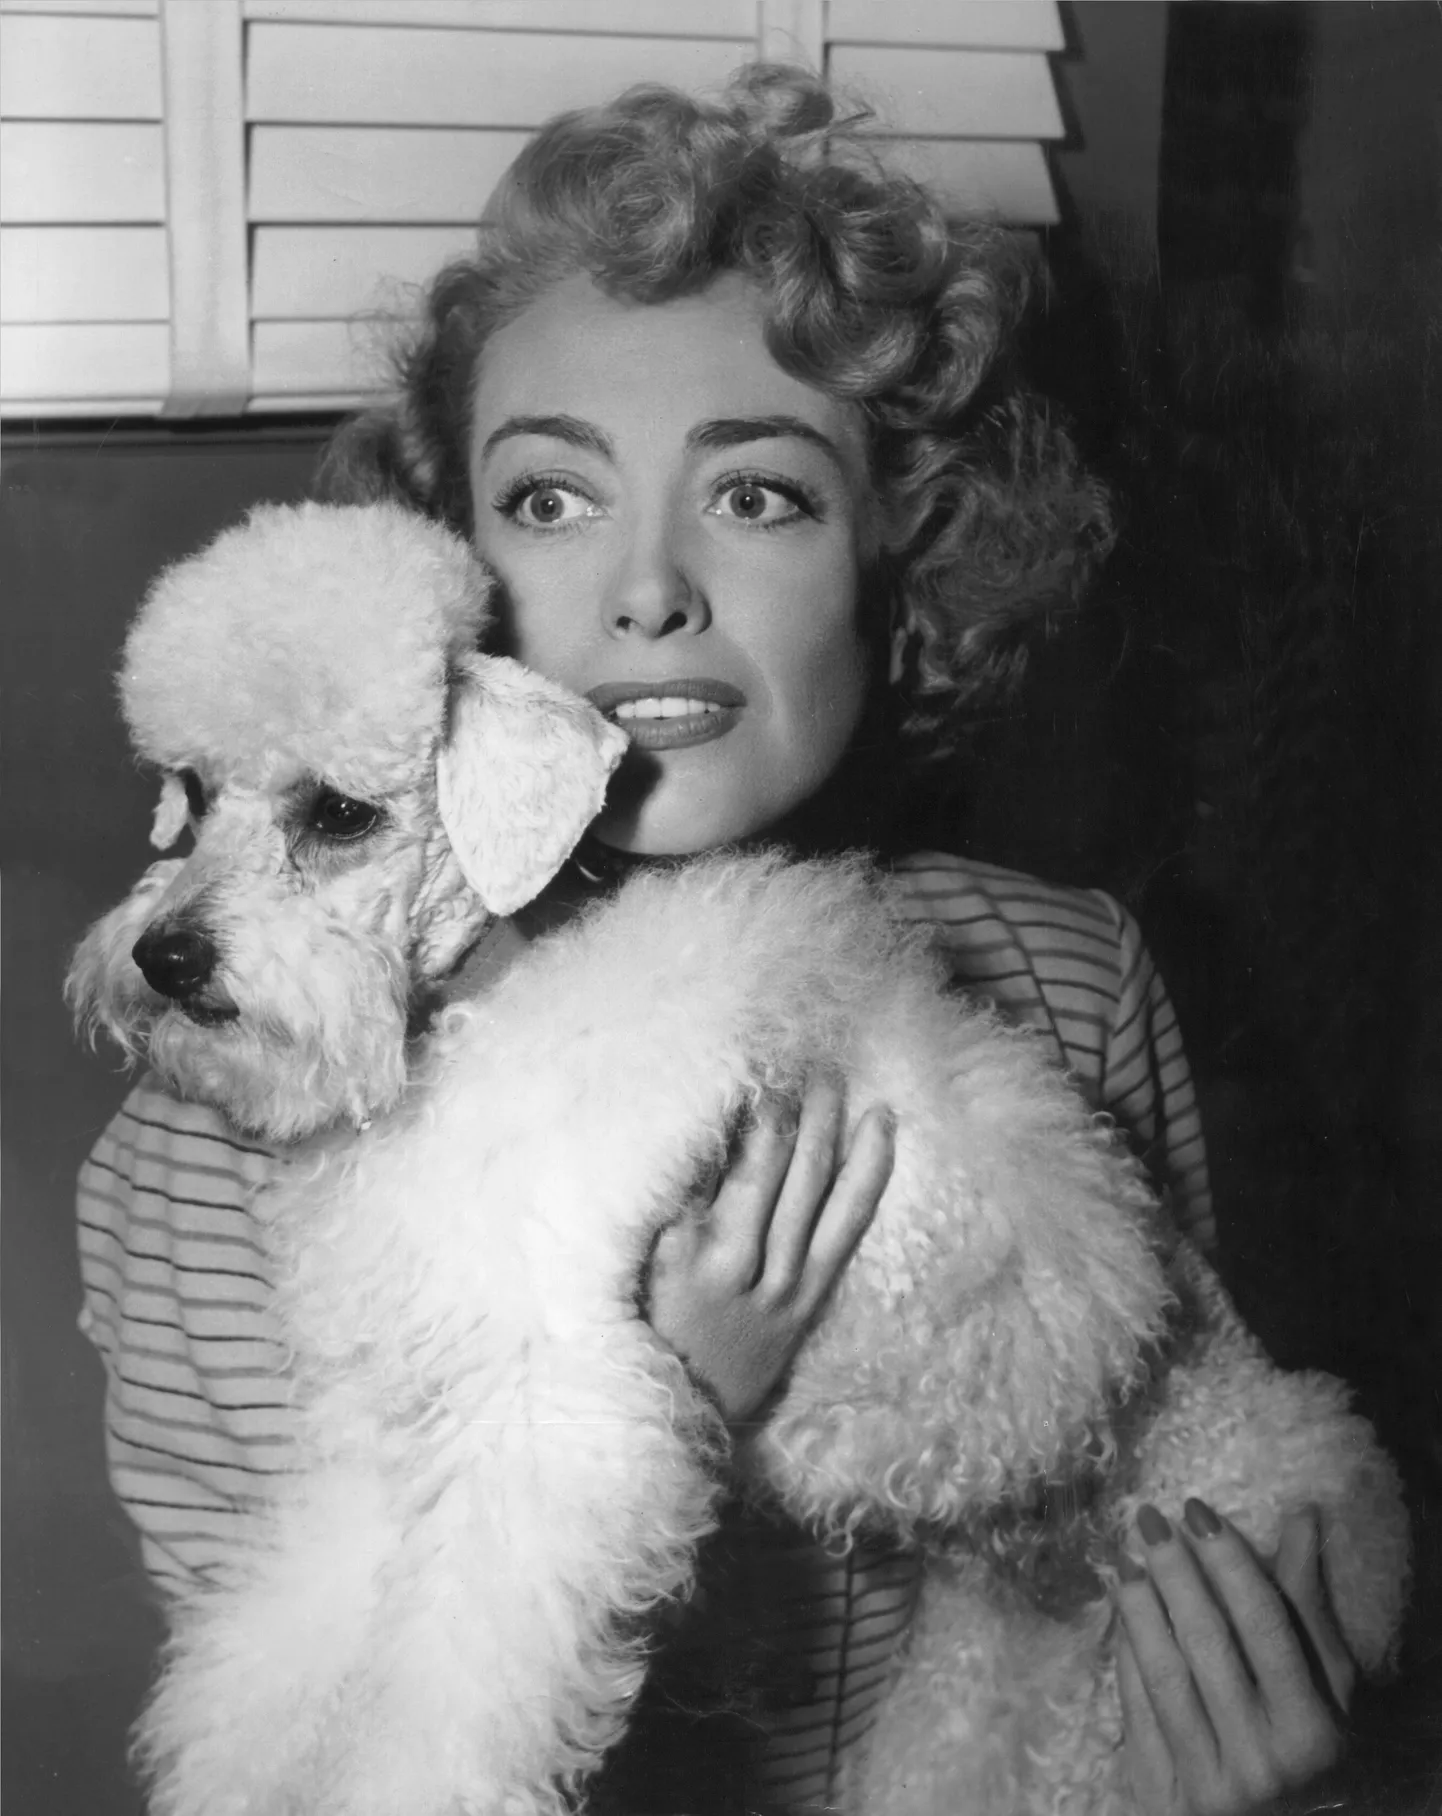 Joan Crawford pictured with her French poodle, "Cliquot"